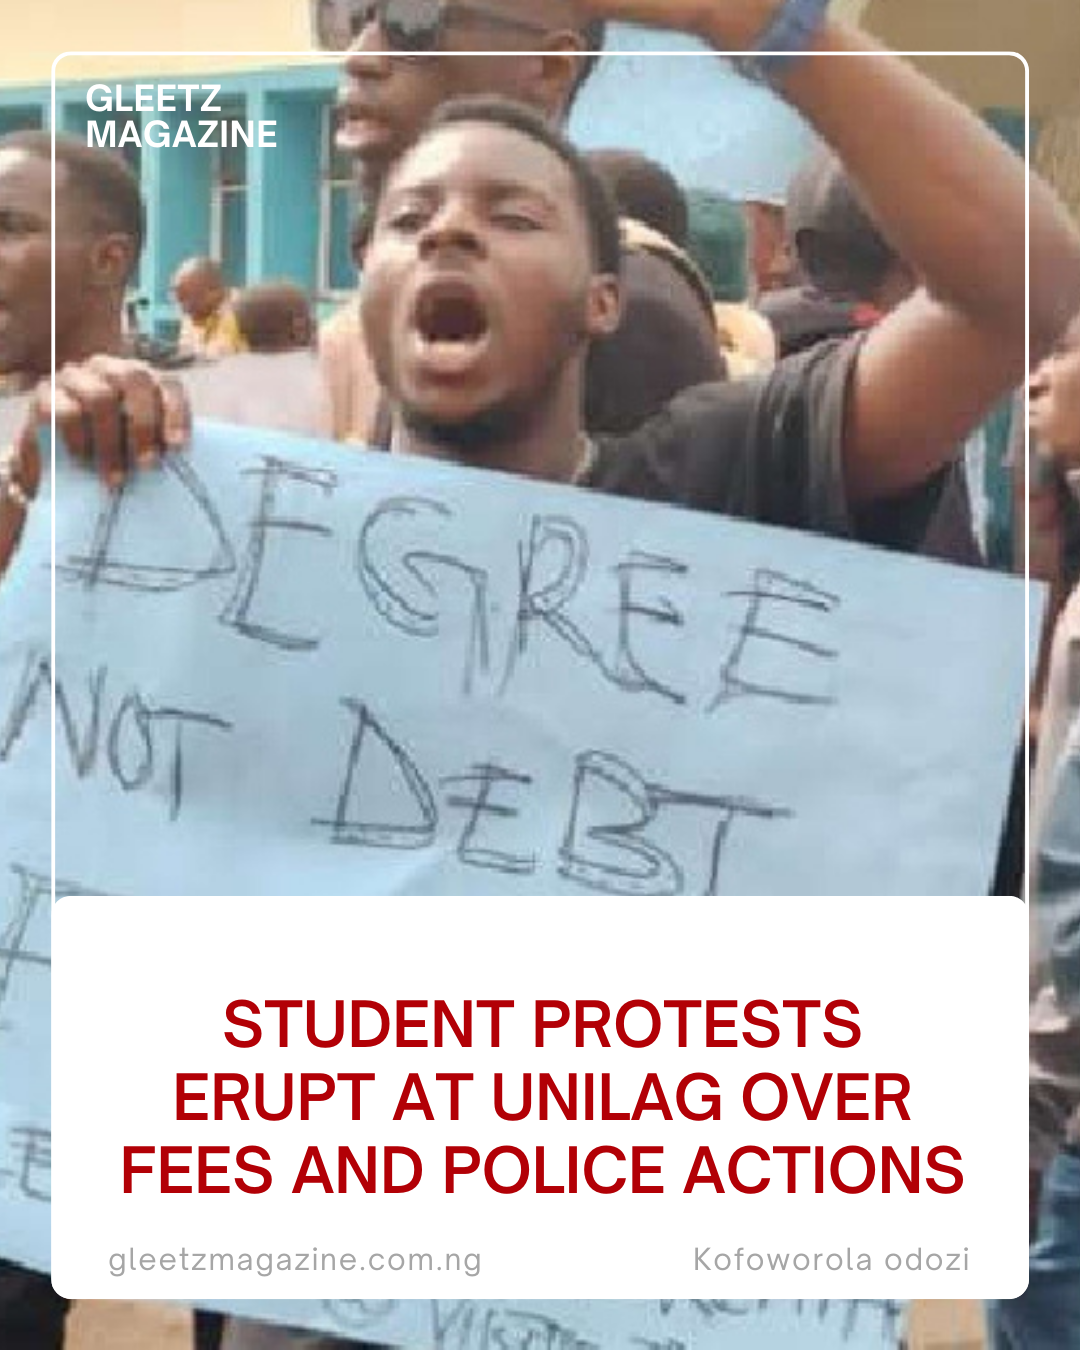 Student Protests Erupt at UNILAG Over Fees and Police Actions